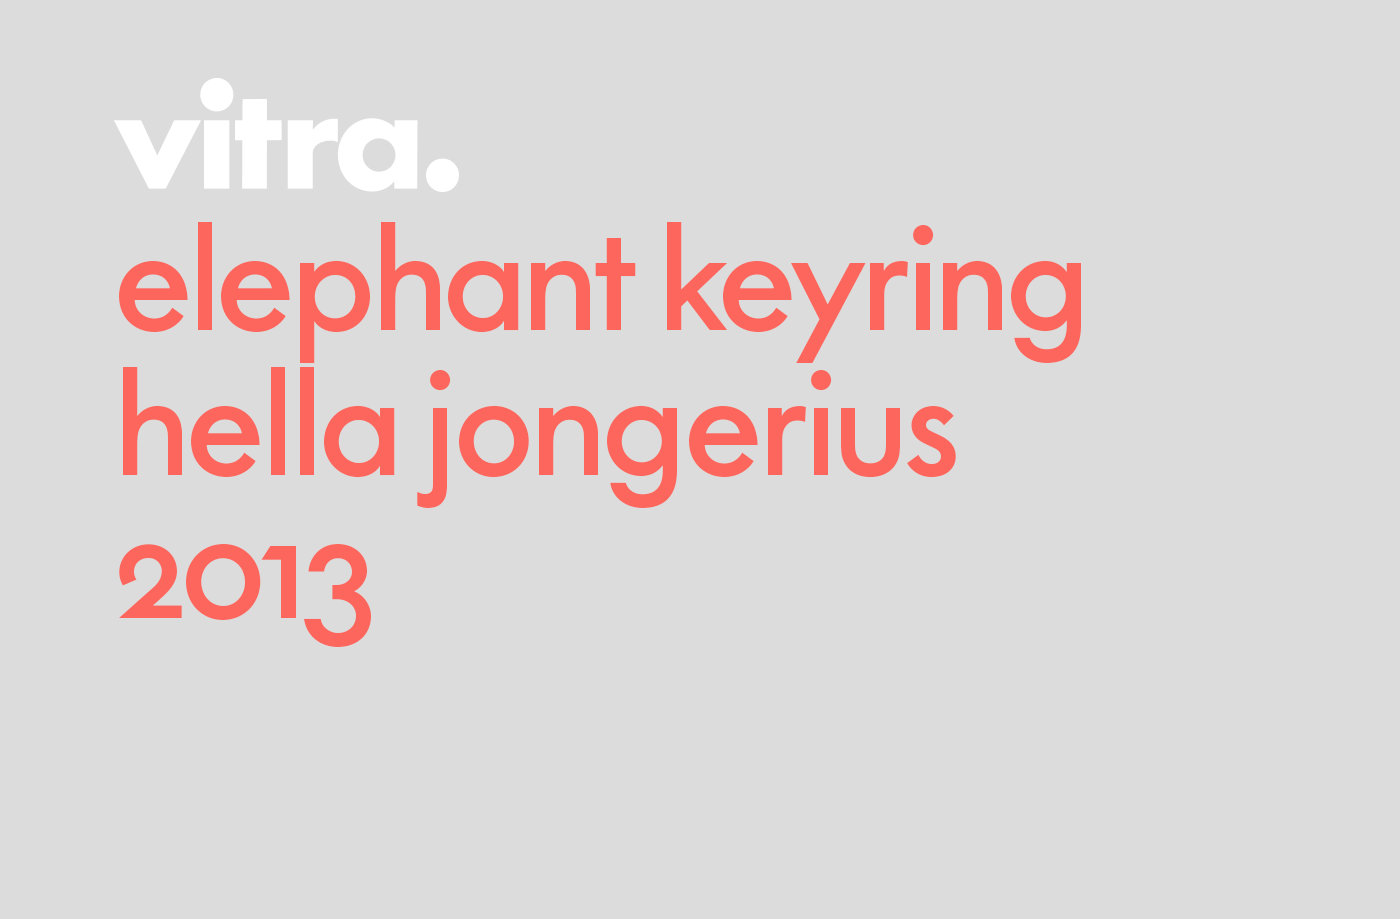 Typographic system for Vitra by BVD